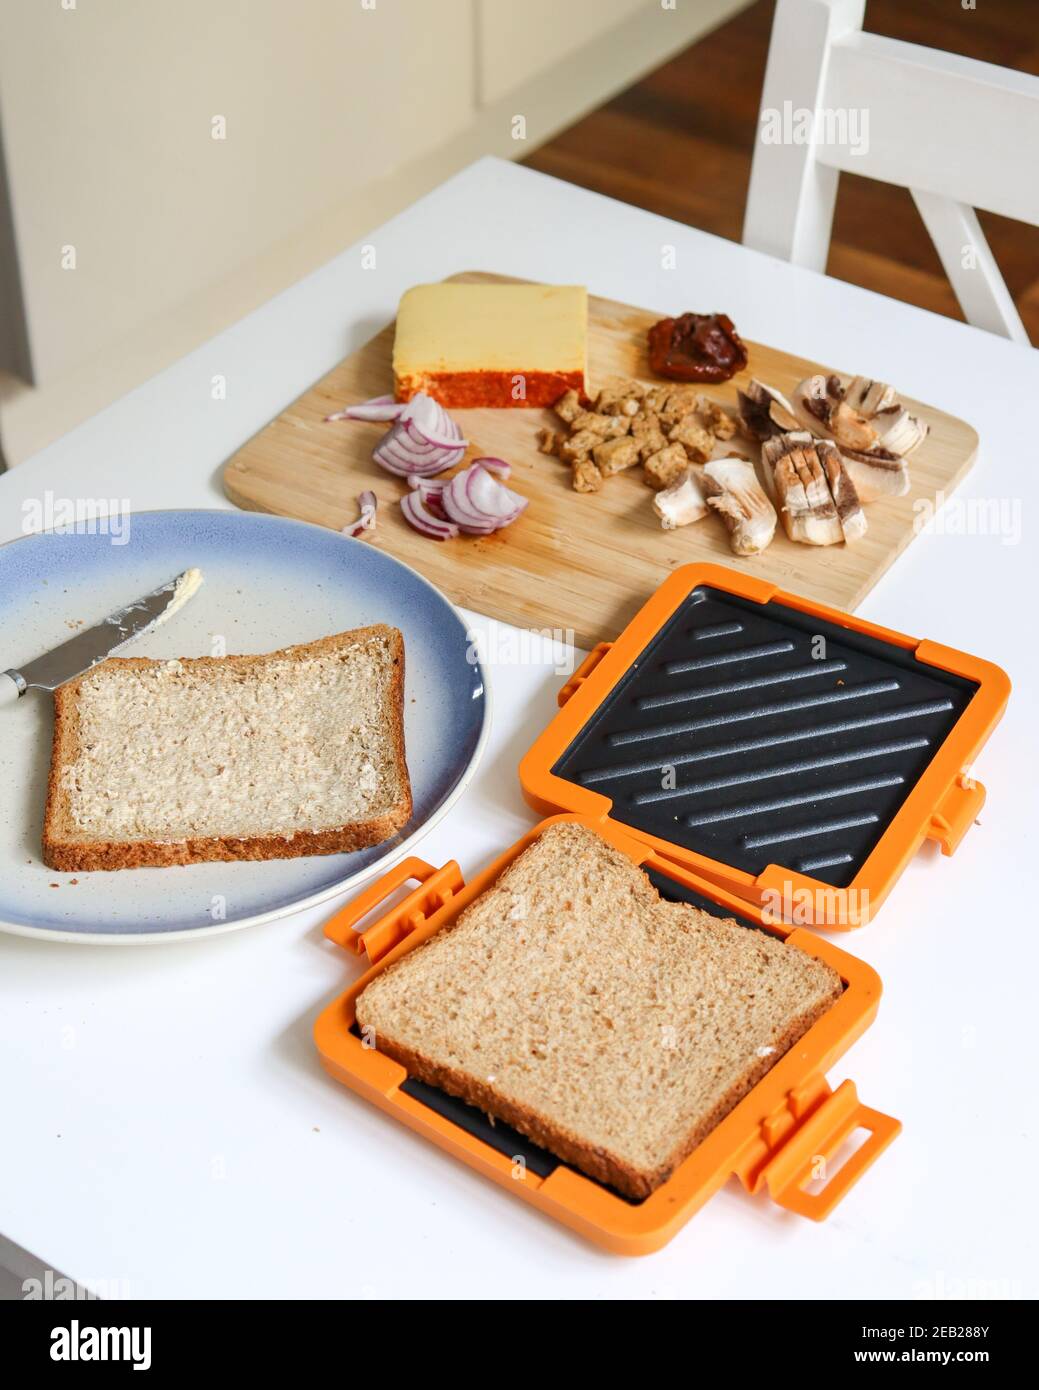 https://c8.alamy.com/comp/2EB288Y/morphy-richards-mico-toastie-toasted-sandwiches-microwave-cookware-kitchen-food-preparation-cooking-snack-grilled-sandwich-ve-2EB288Y.jpg